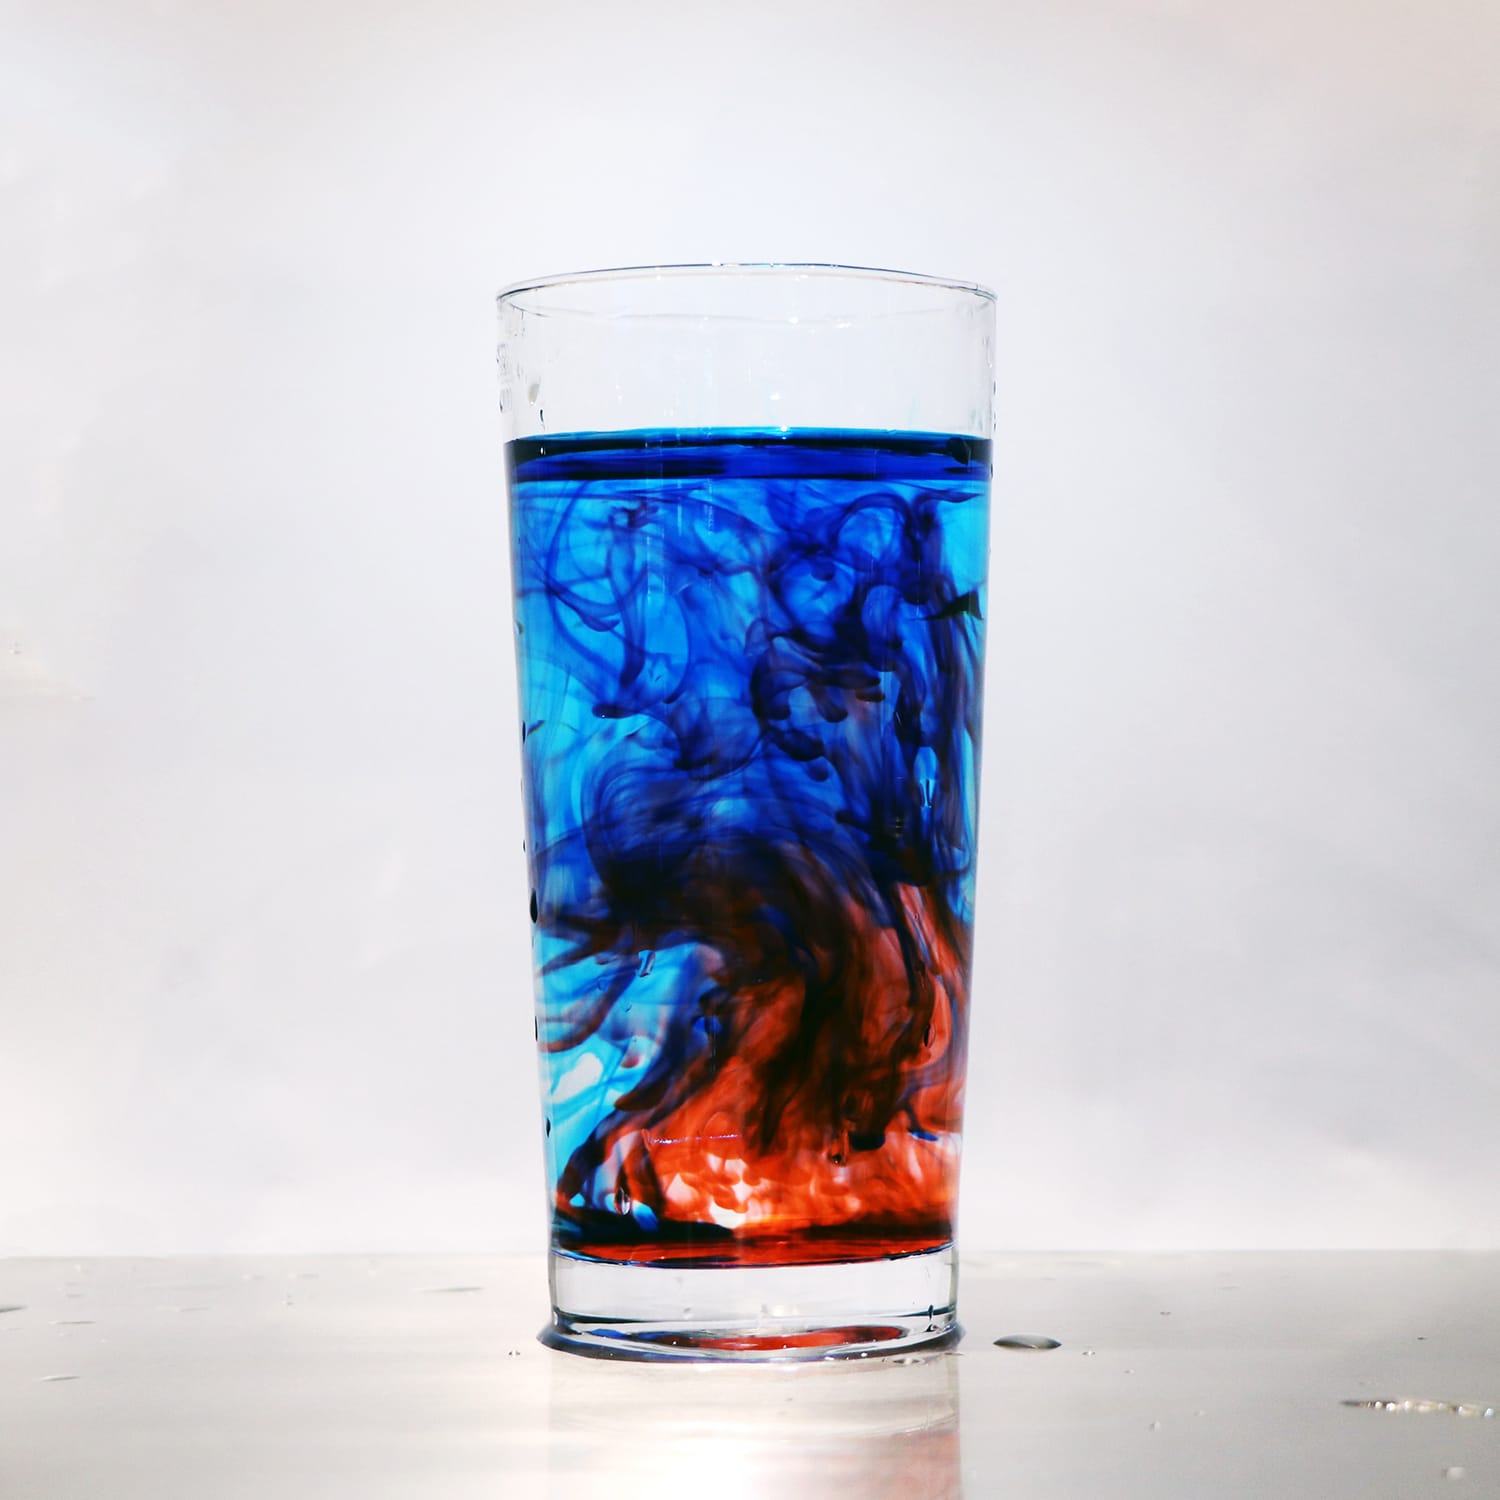 Photograph the whimsy of colored liquids using food dye and a glass of water